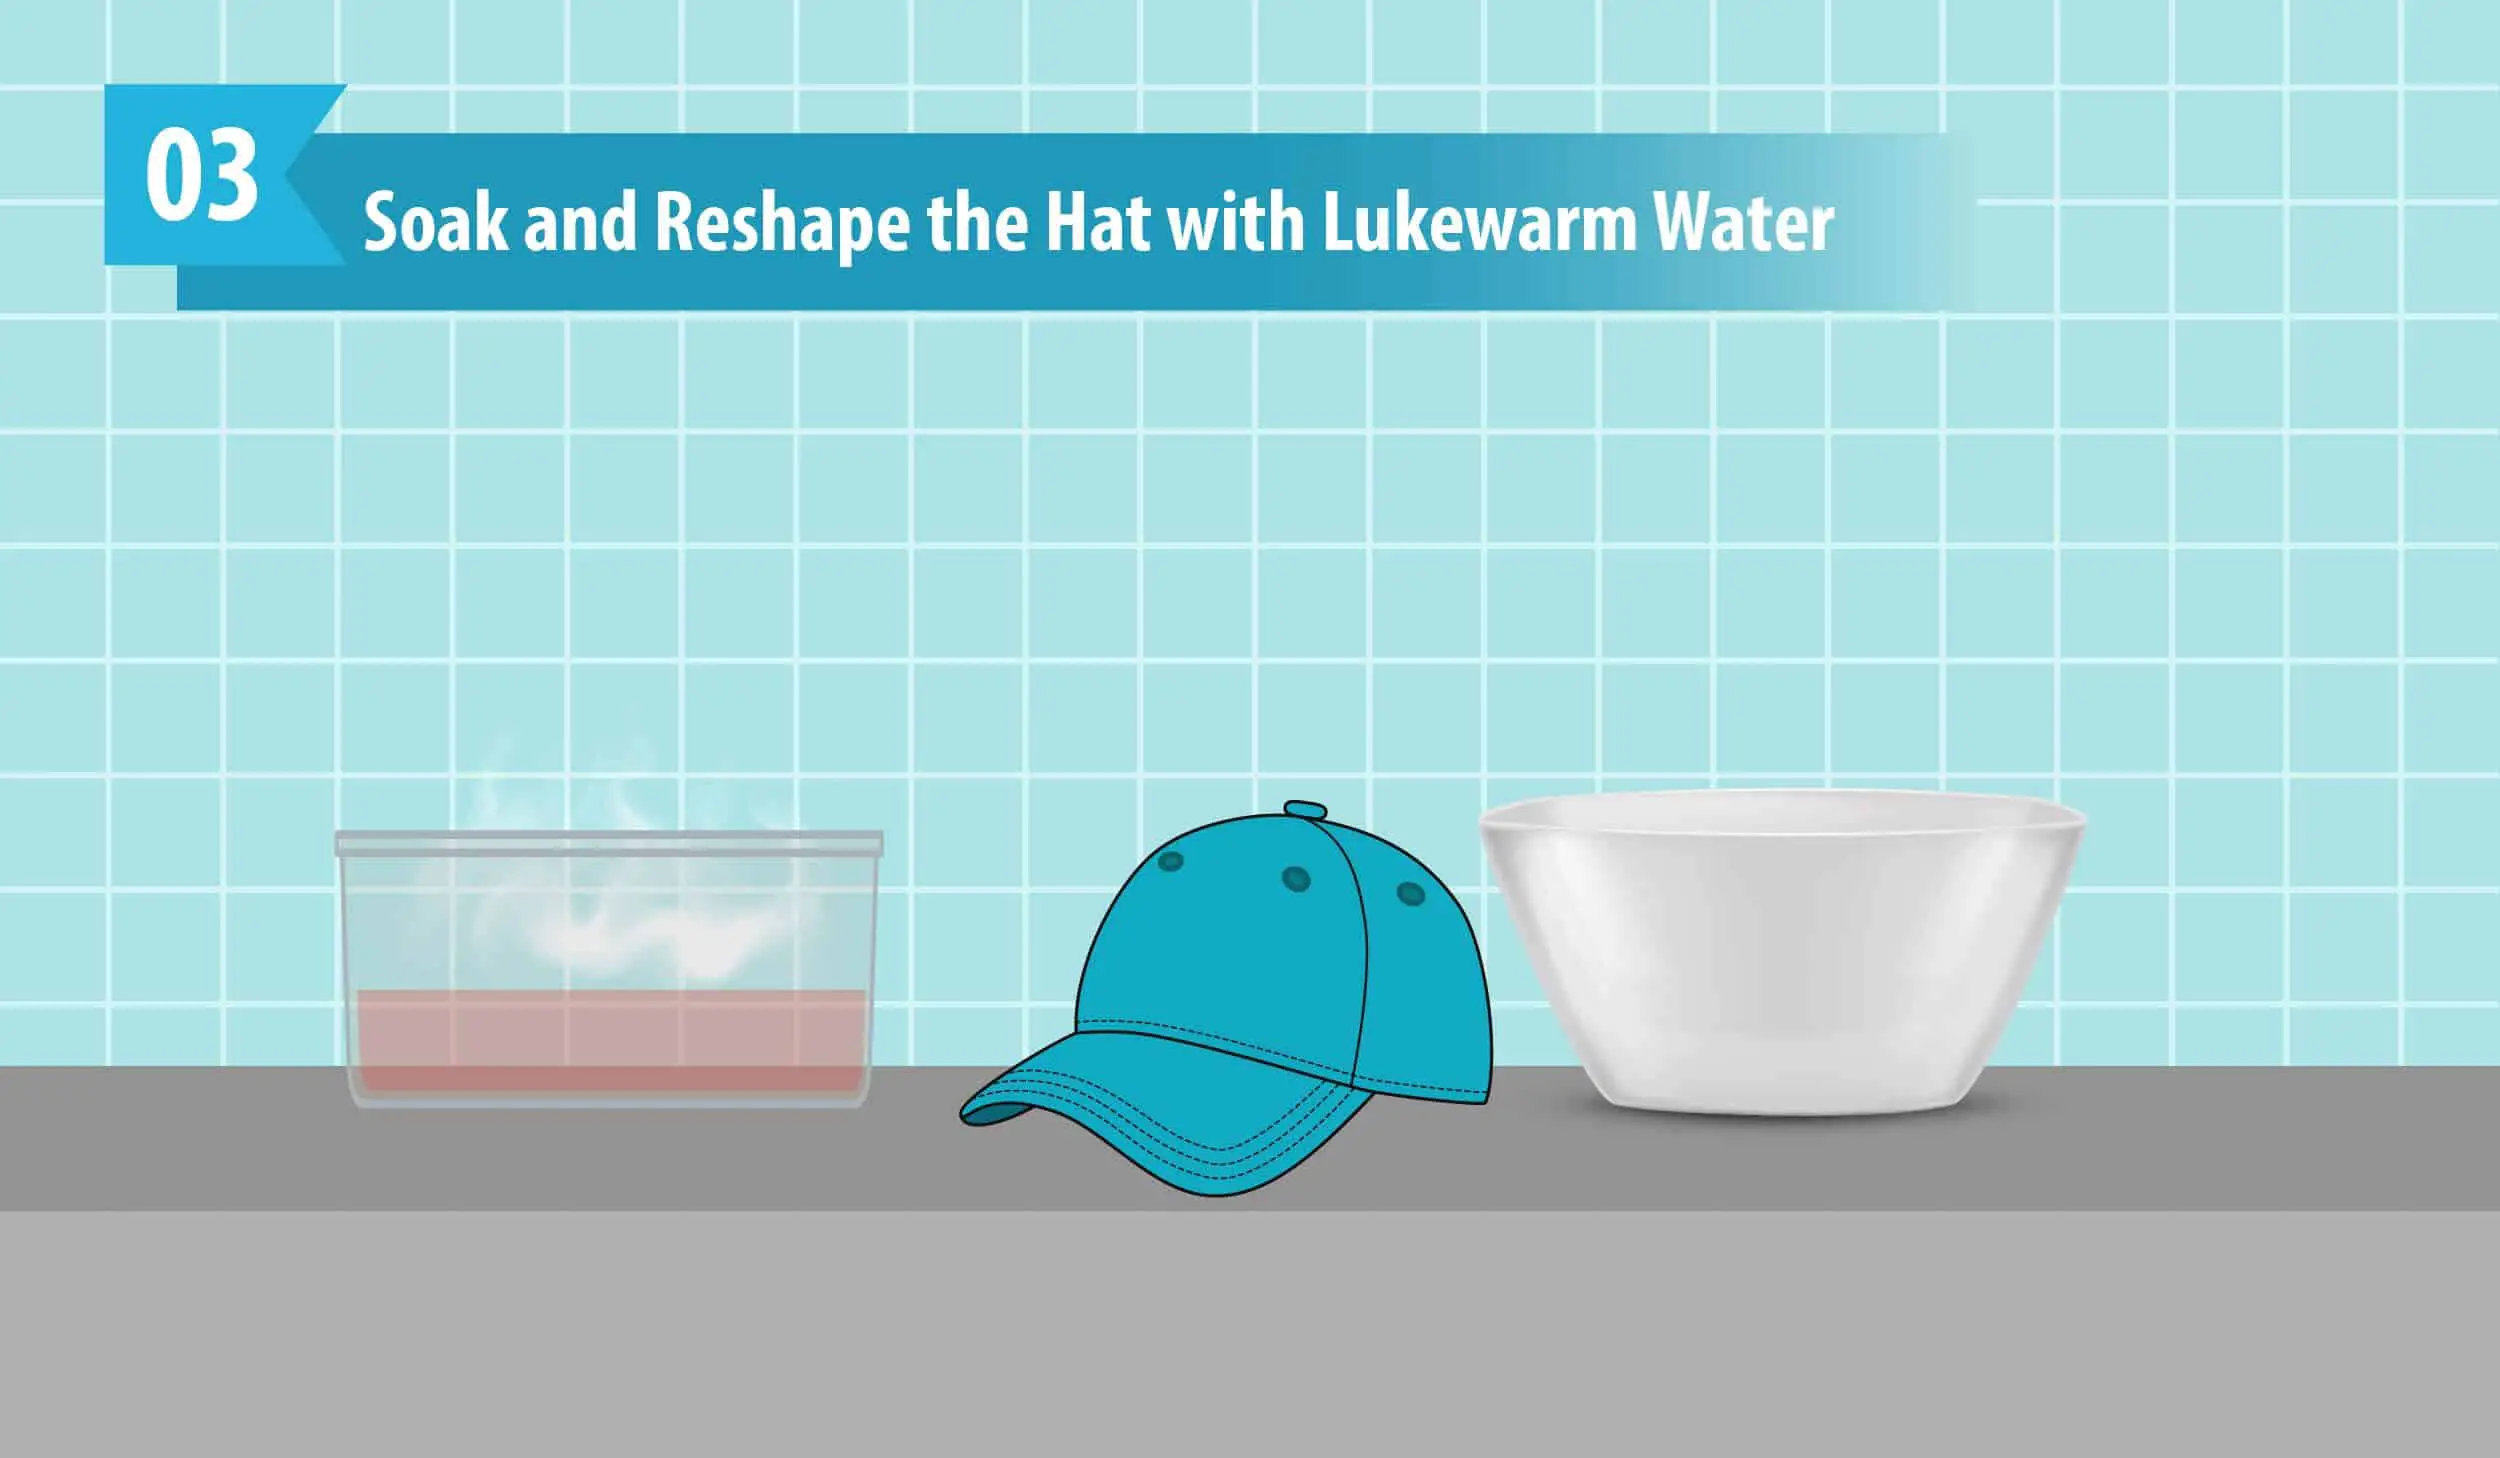 Soak and Reshape the Hat with Lukewarm Water